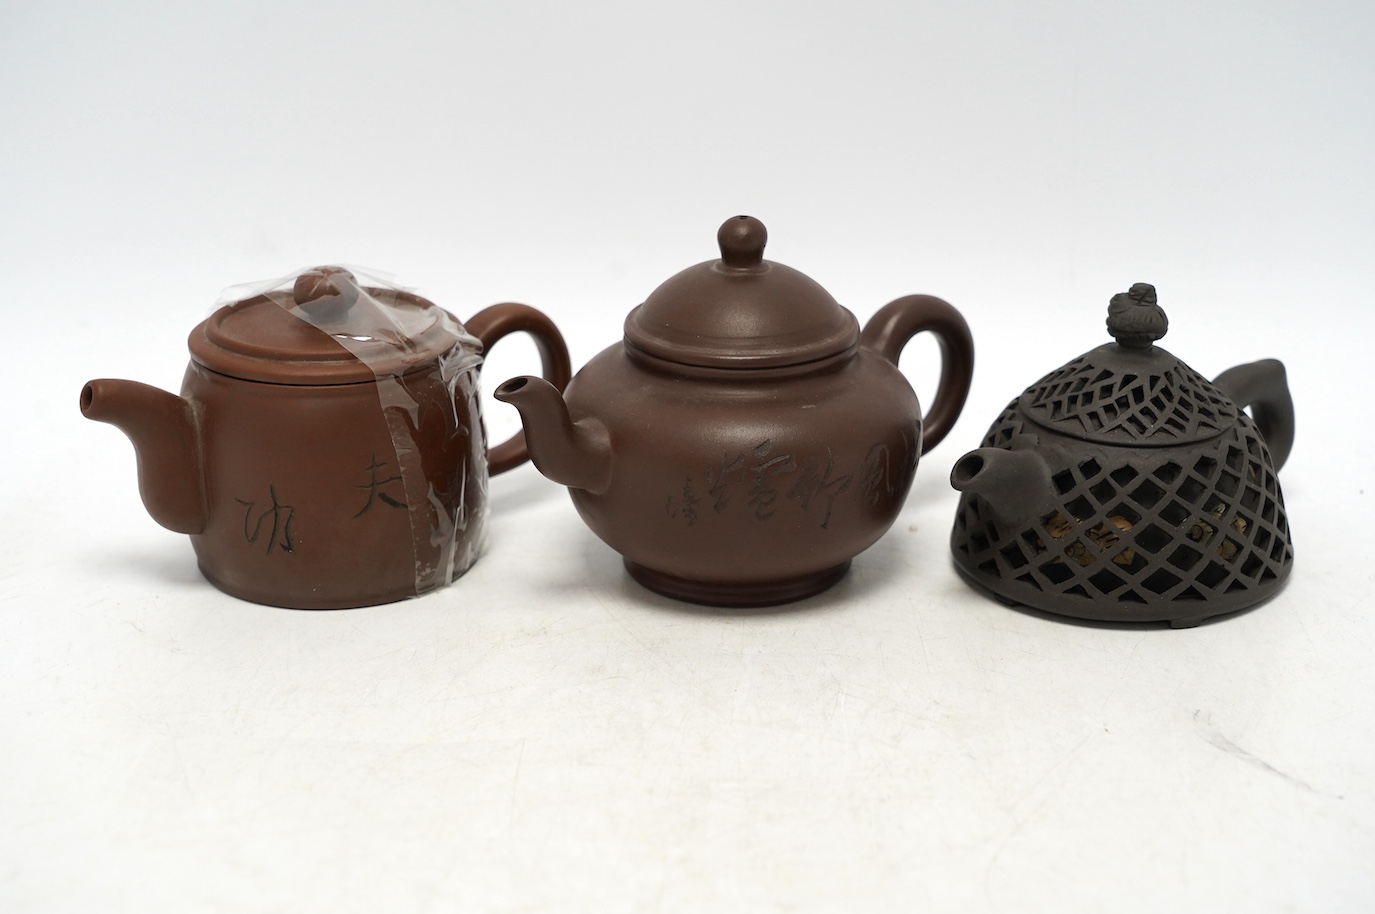 Three Yixing teapots, one double walled lattice worked body, tallest 11cm. Condition - good